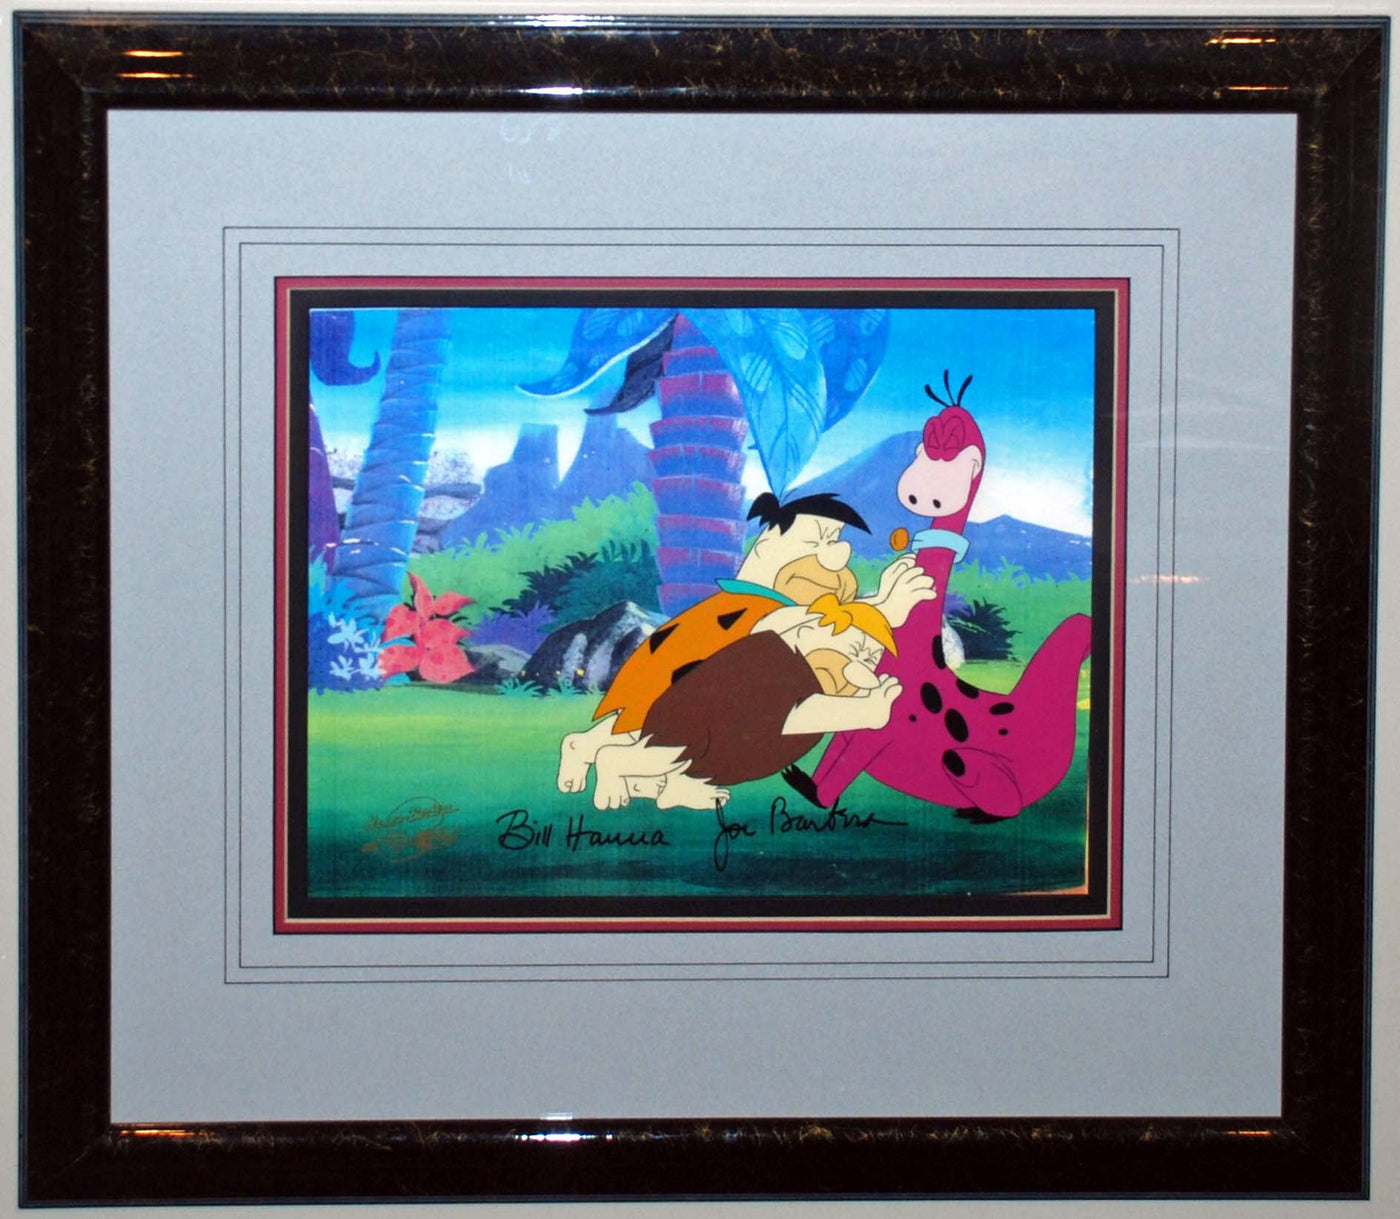 Hanna Barbera Production Cel from The Flintstones featuring Fred Flinstone, Barney Rubble, and Dino